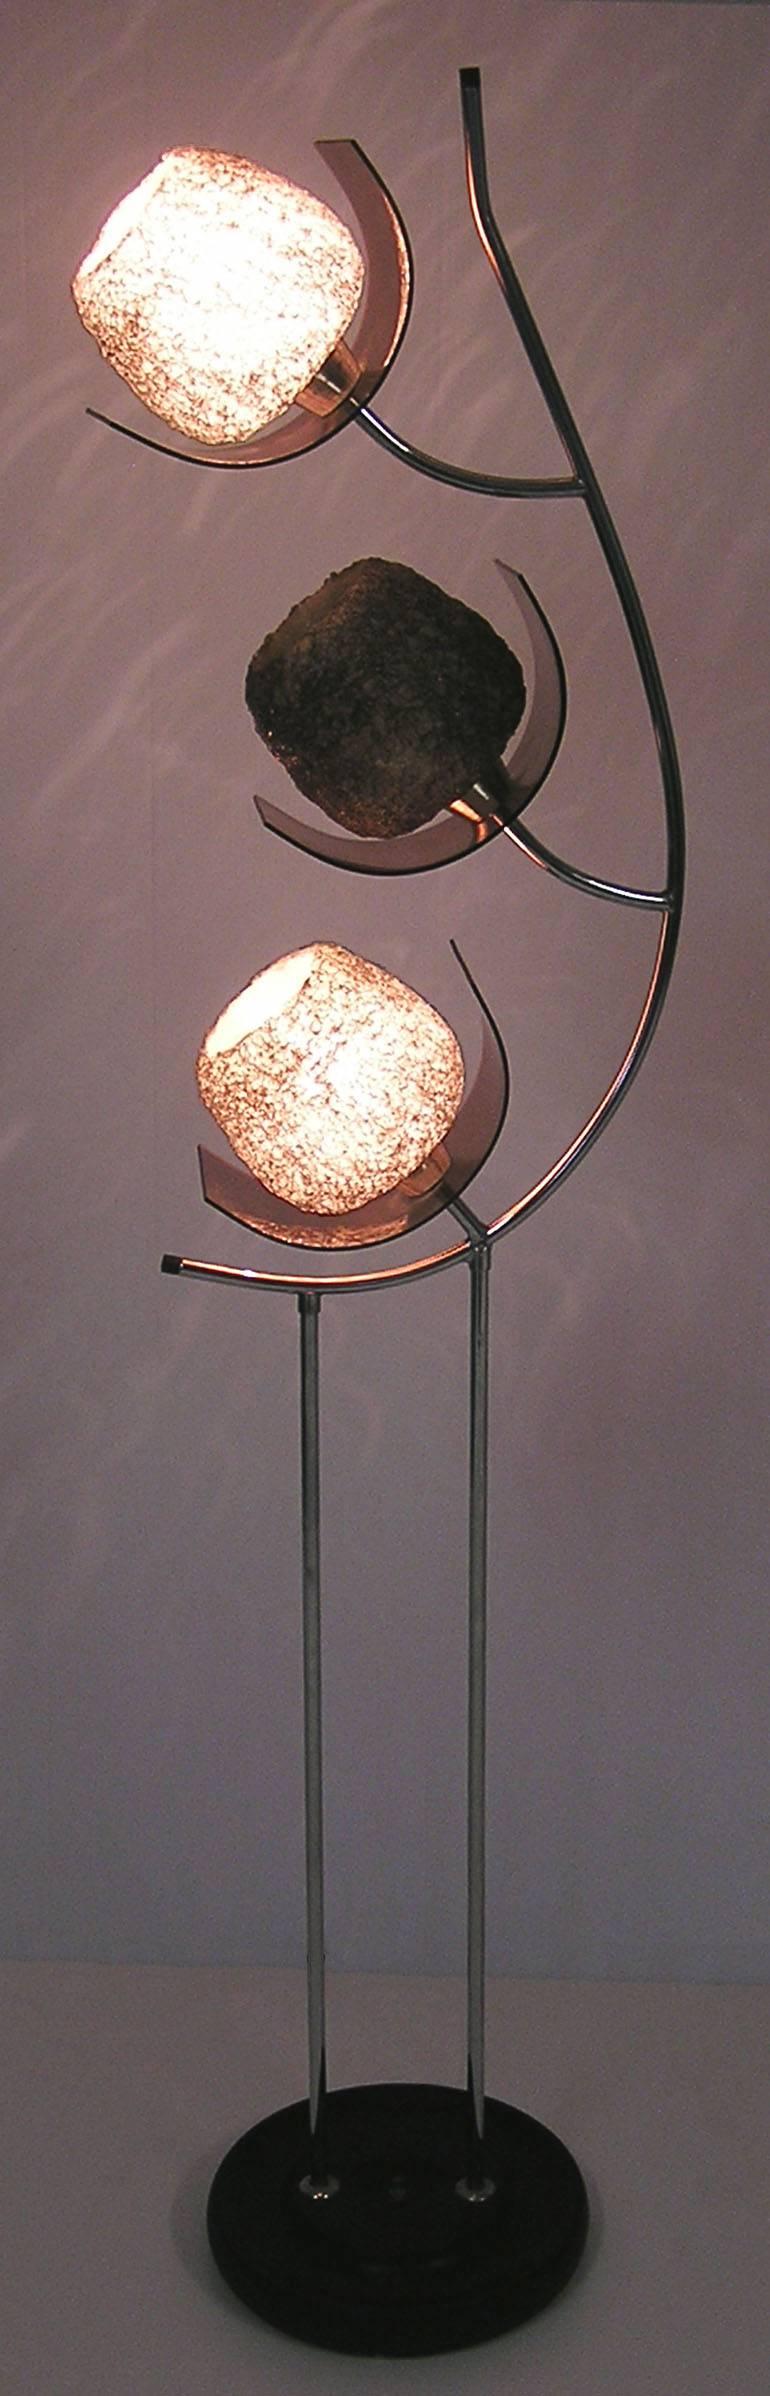 1960s Mid-Century Modern Chrome and Lucite Floor Lamp For Sale 1